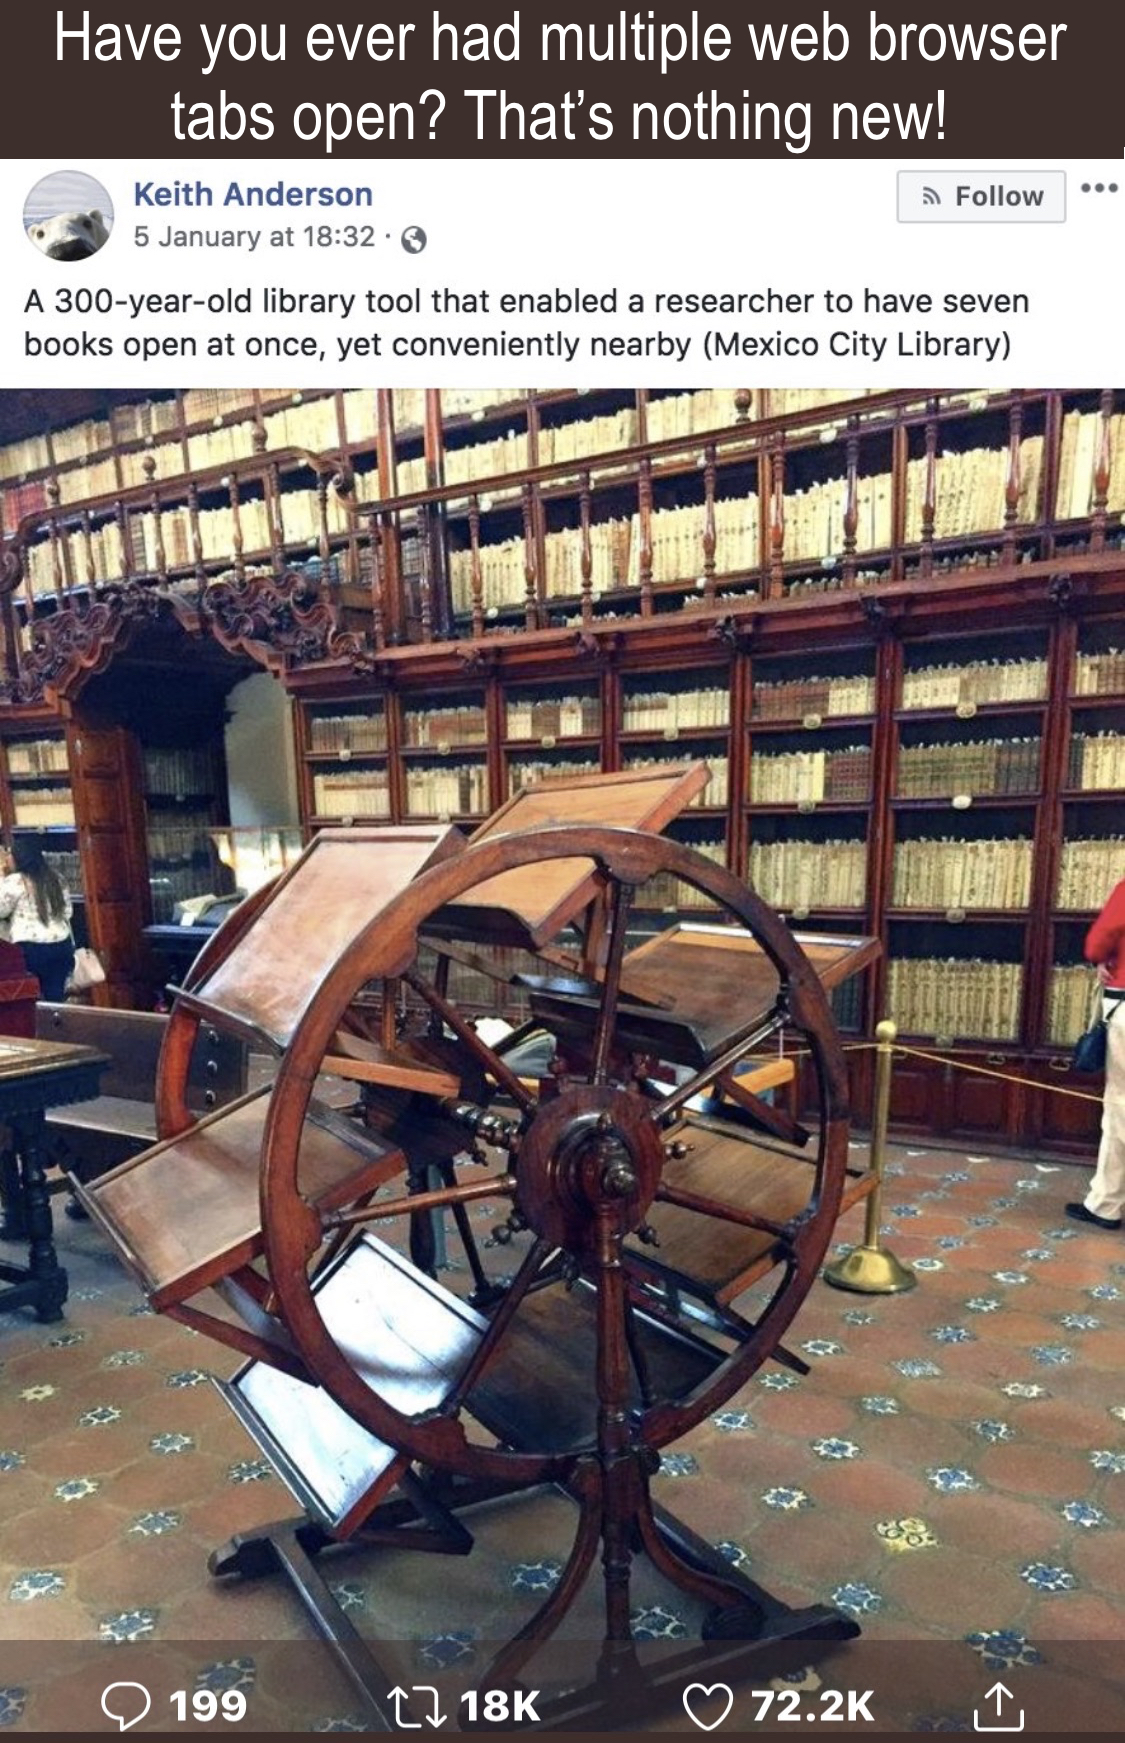 An image with the caption, ''Have you ever had multiple web browser tabs open? That's nothing new! A 300-year-old library tool that enabled a researcher to have seven books open at once, yet conveniently nearby (Mexico City Library)'' The image is of a large object resembling a waterwheel. There are multiple flat surfaces large enough to hold an open book that will rotate in such a way that the user may view any book they rotate in front of them.